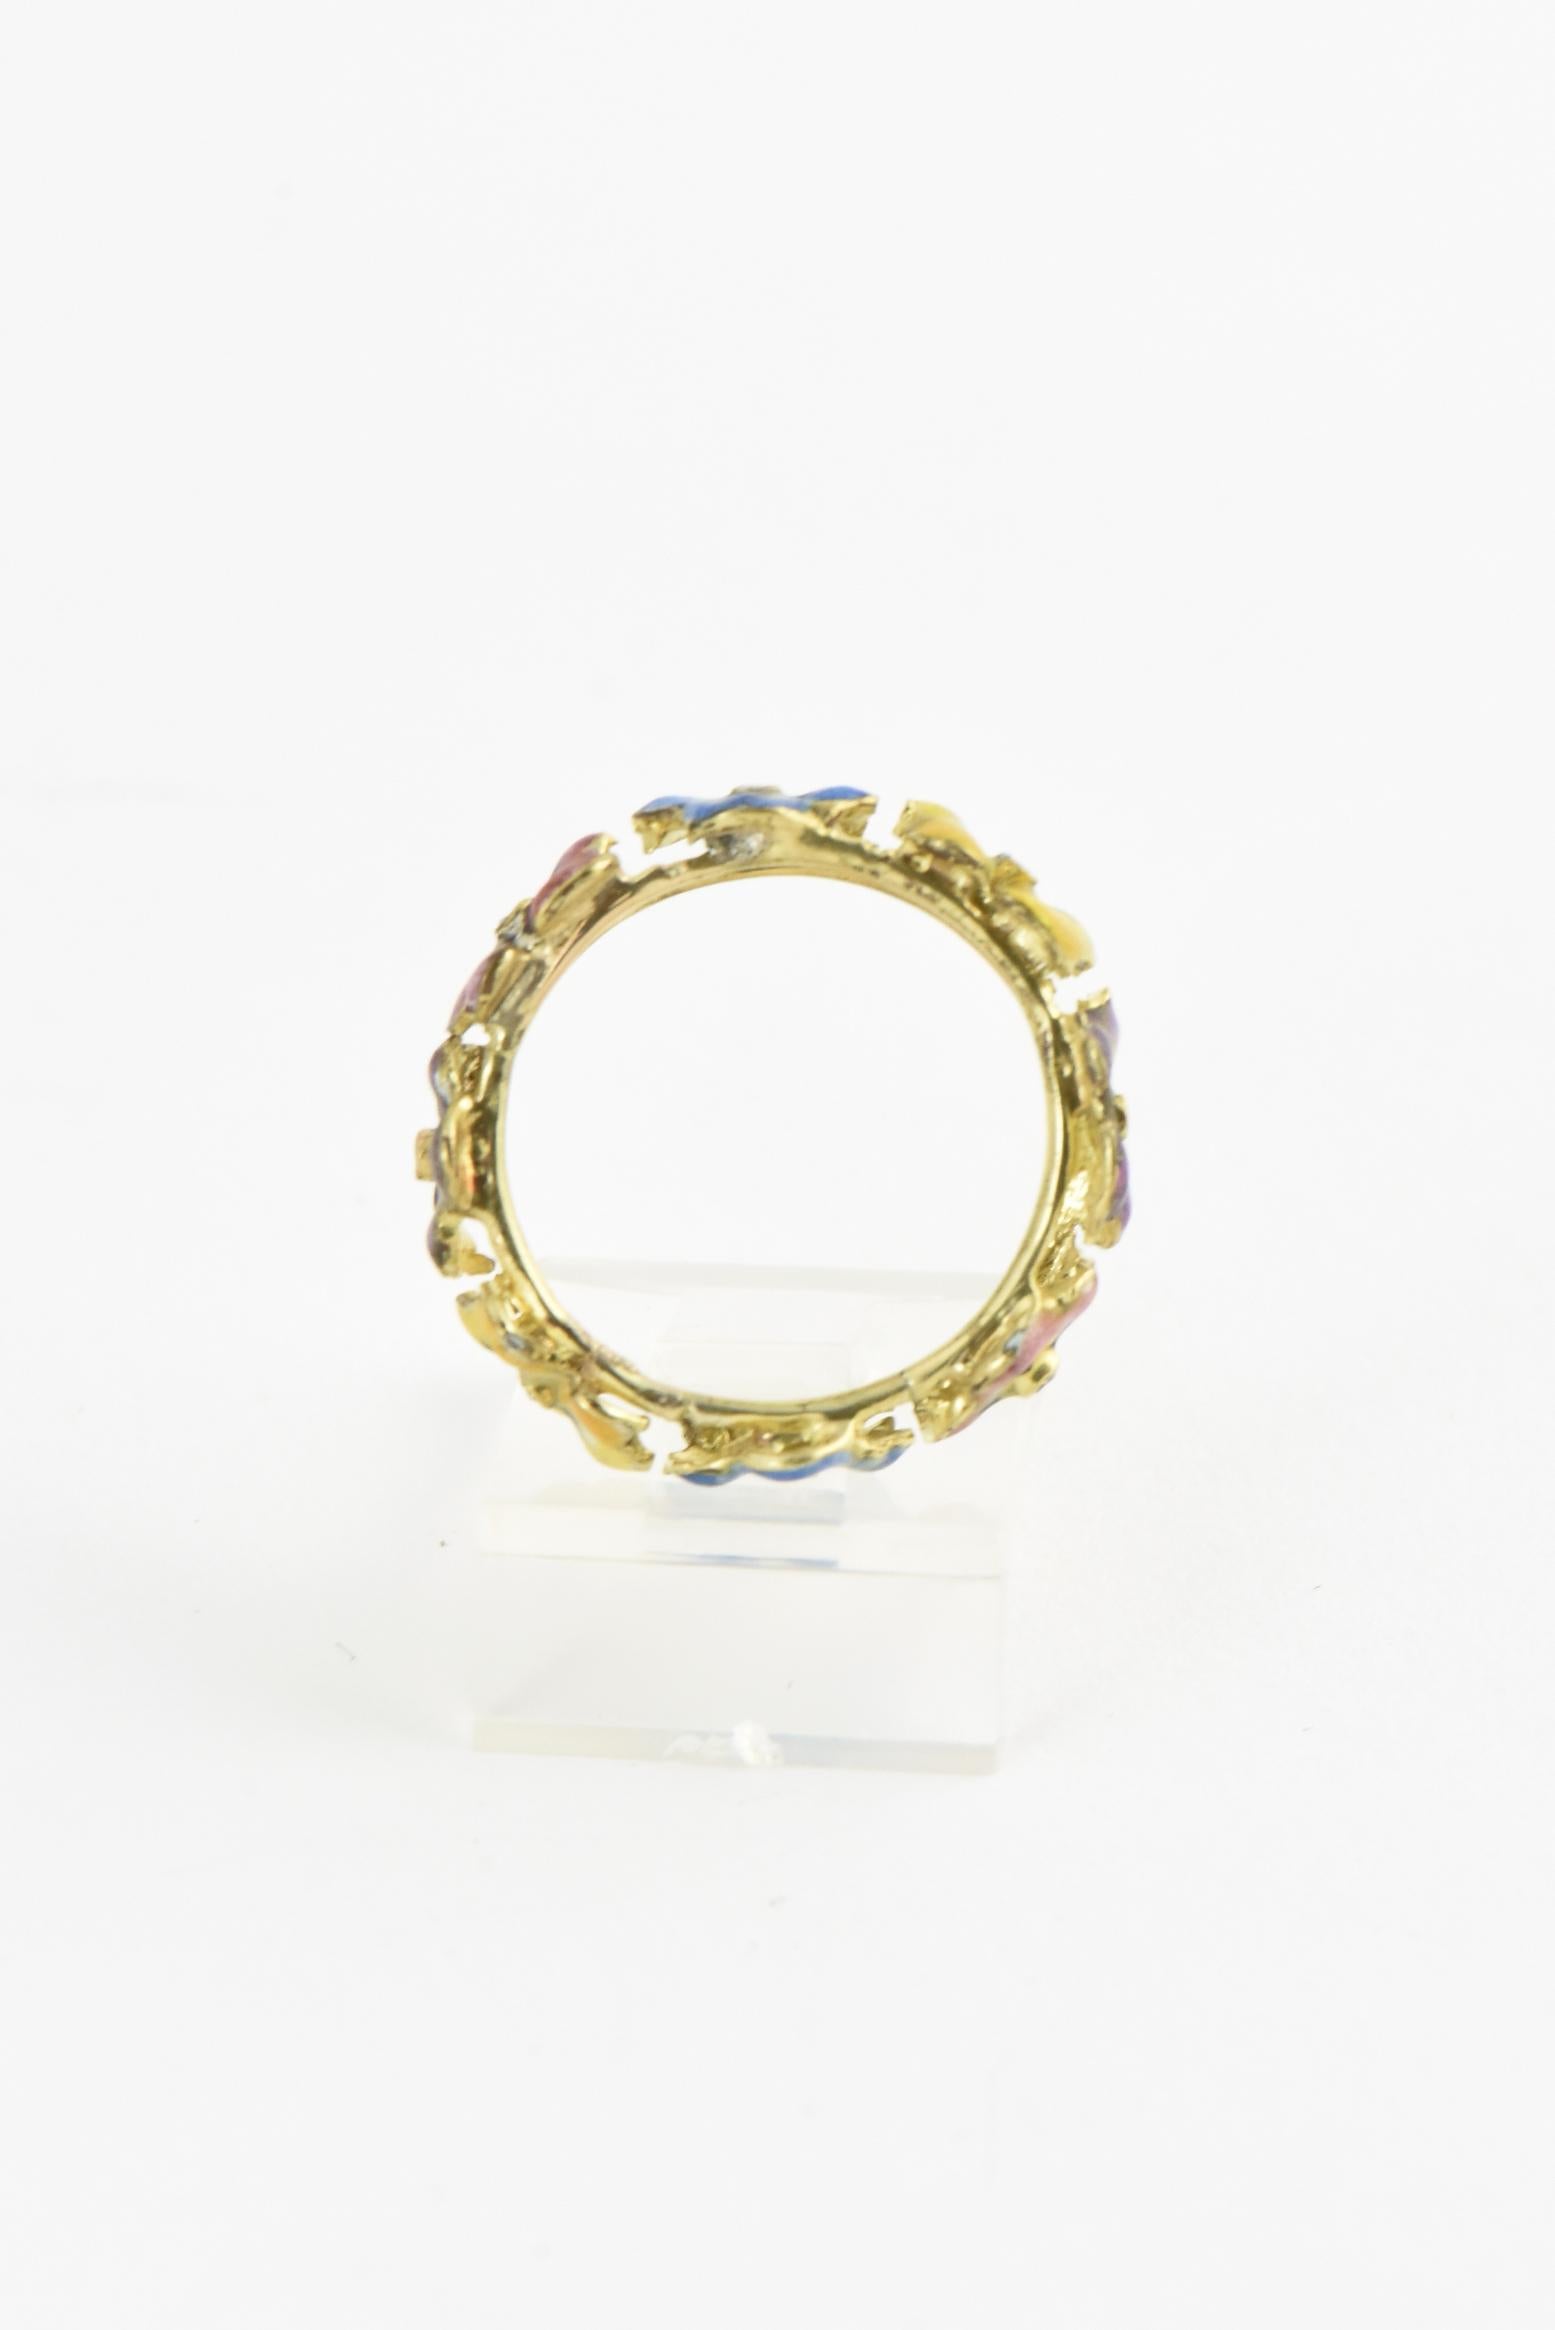 Round Cut Antique Enamel and Diamond Yellow Gold Pansy Band Ring